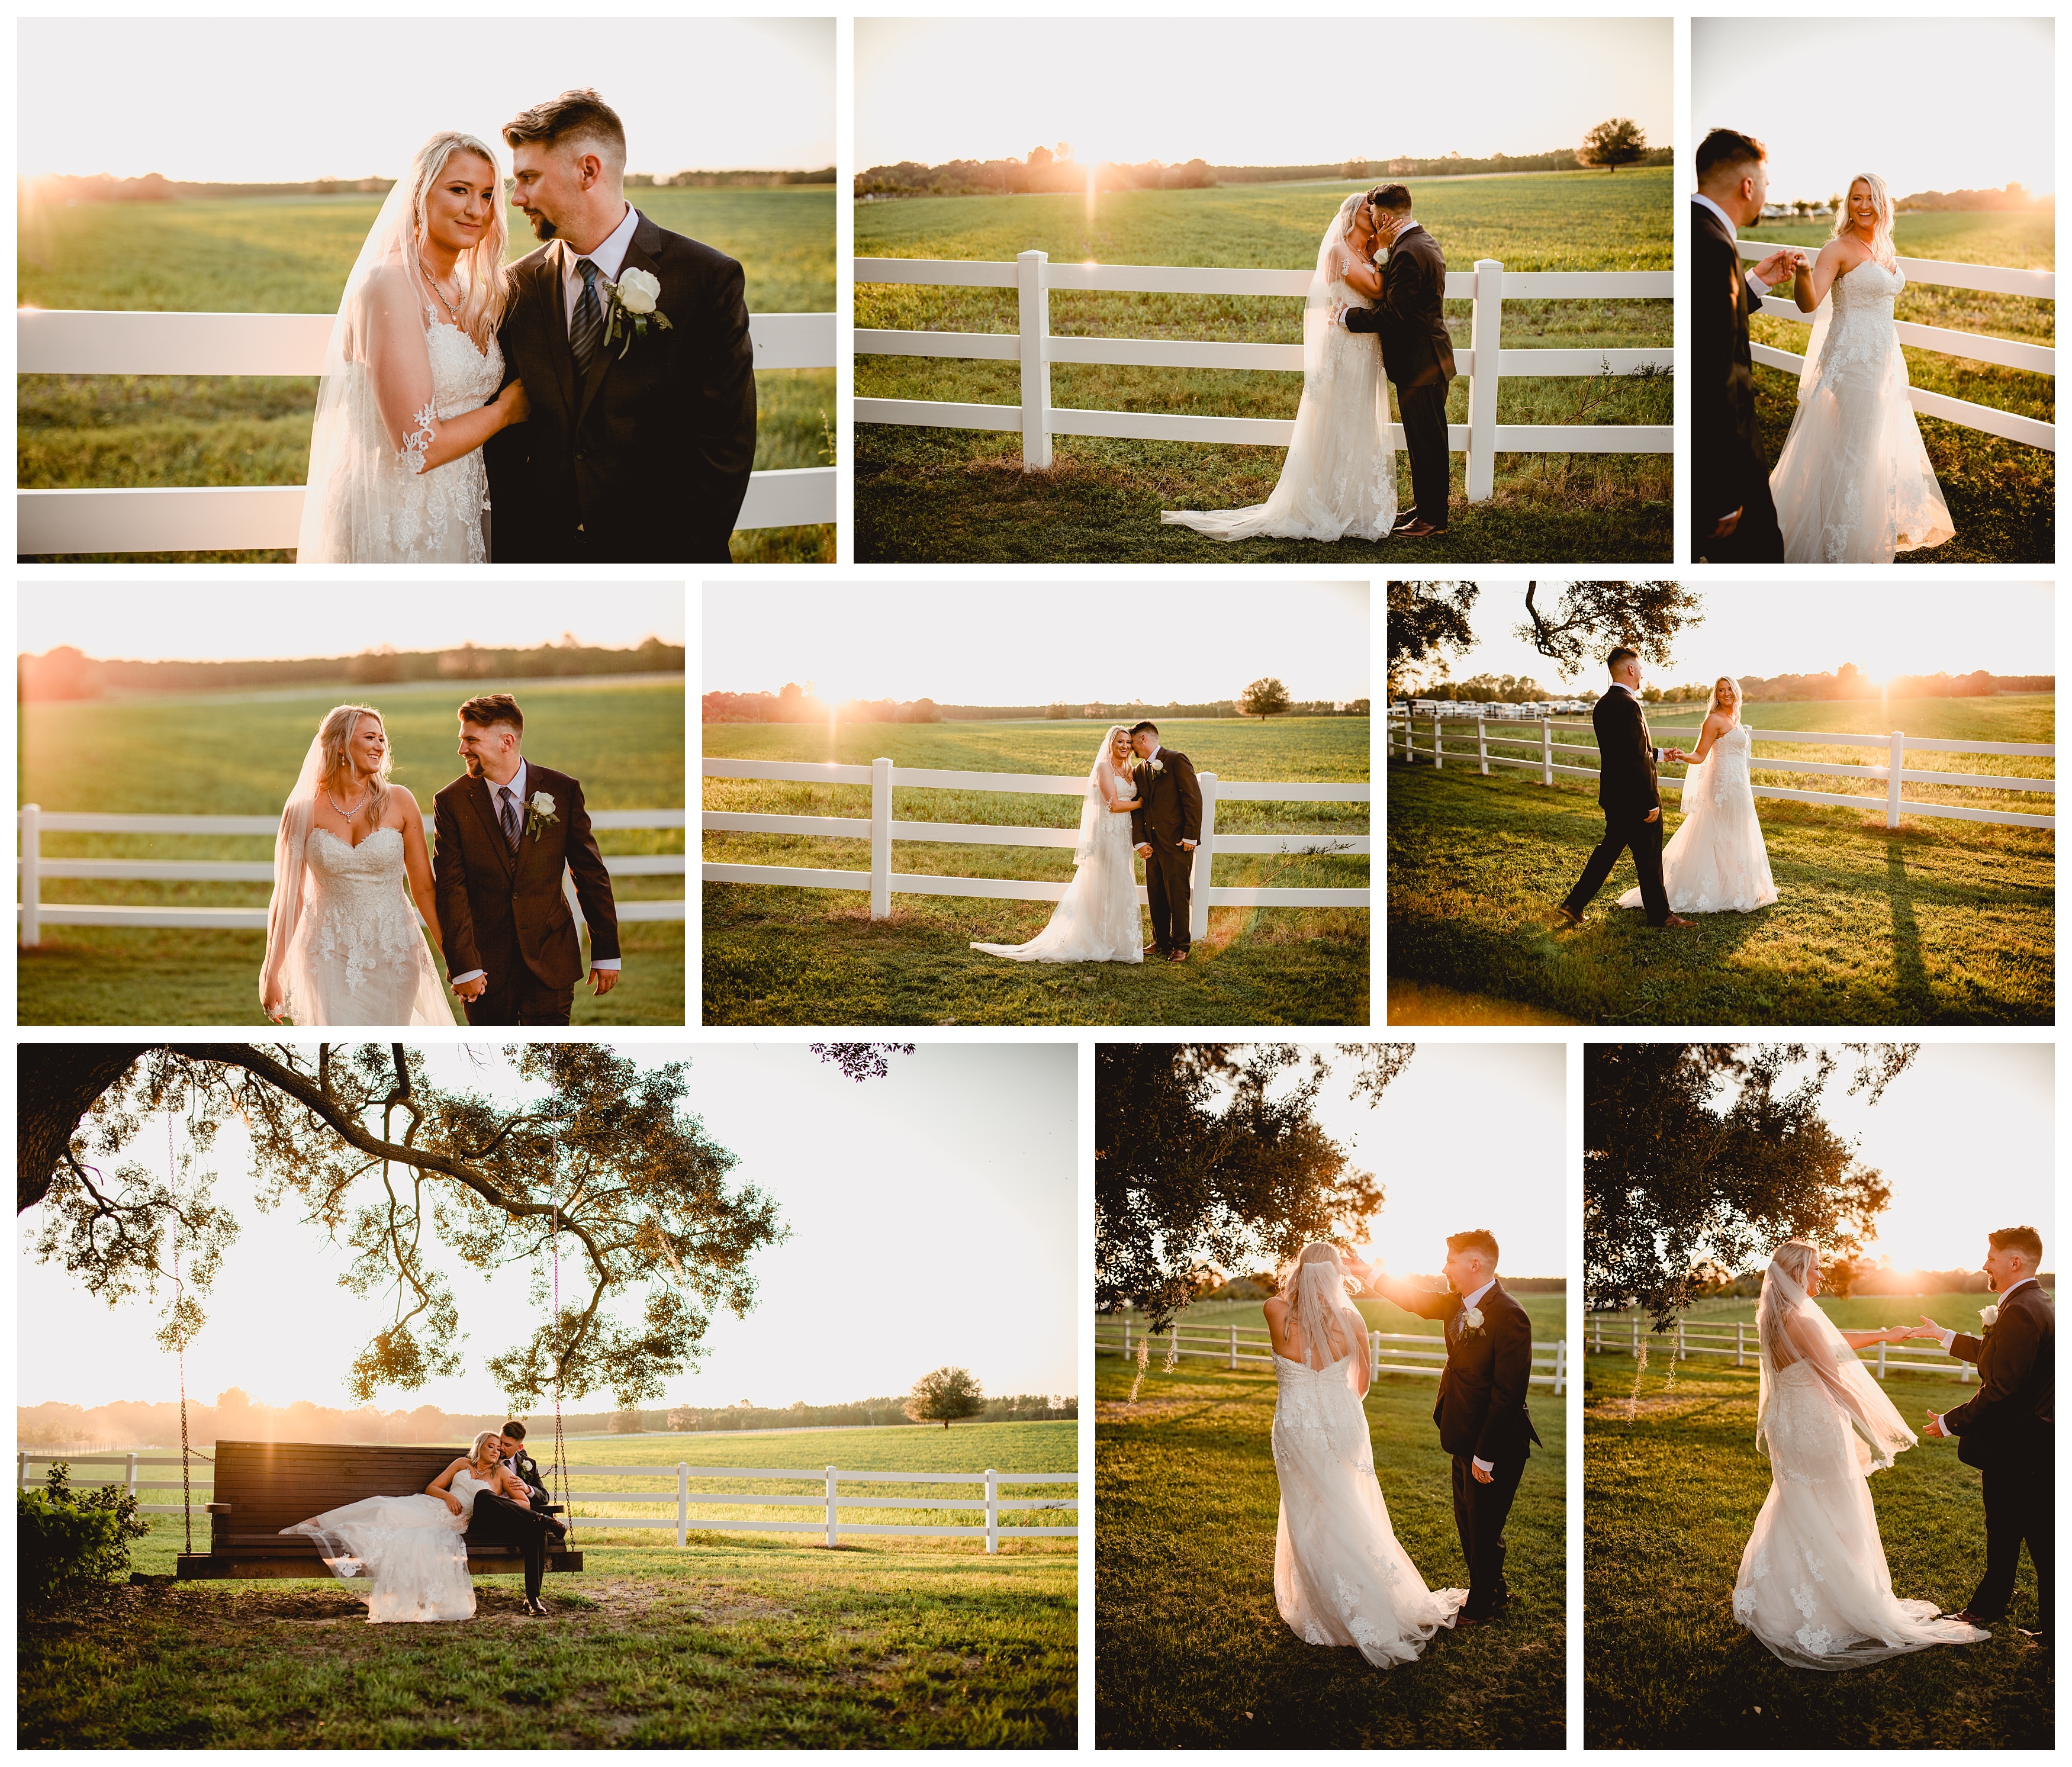 Bride and groom sunset portraits in Gainesville, FL by professional wedding photographer Shelly Williams.